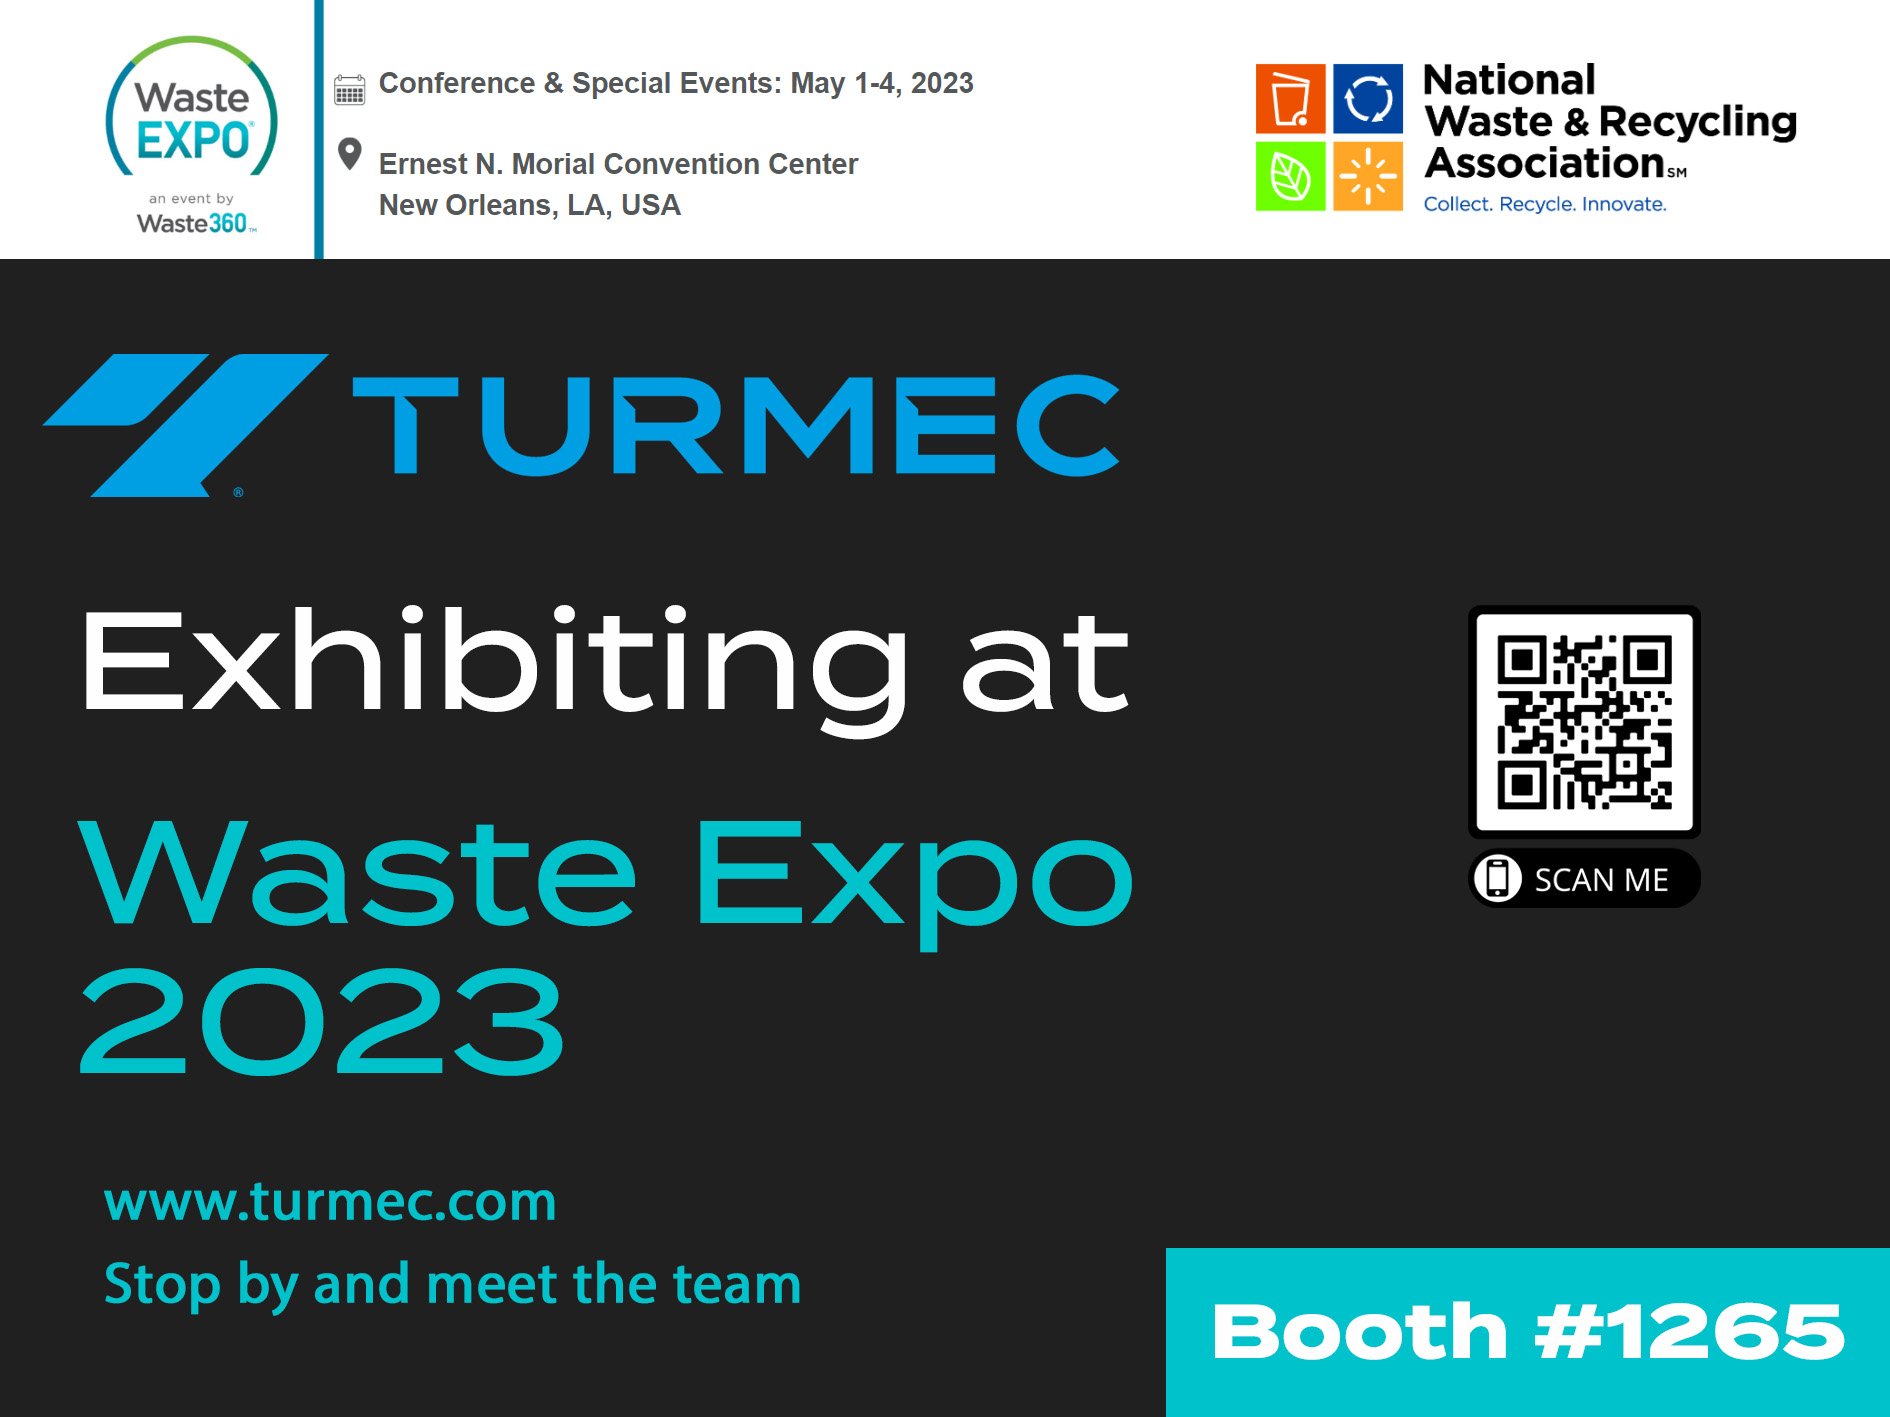 We are Exhibiting at Waste Expo 2023 New Orleans